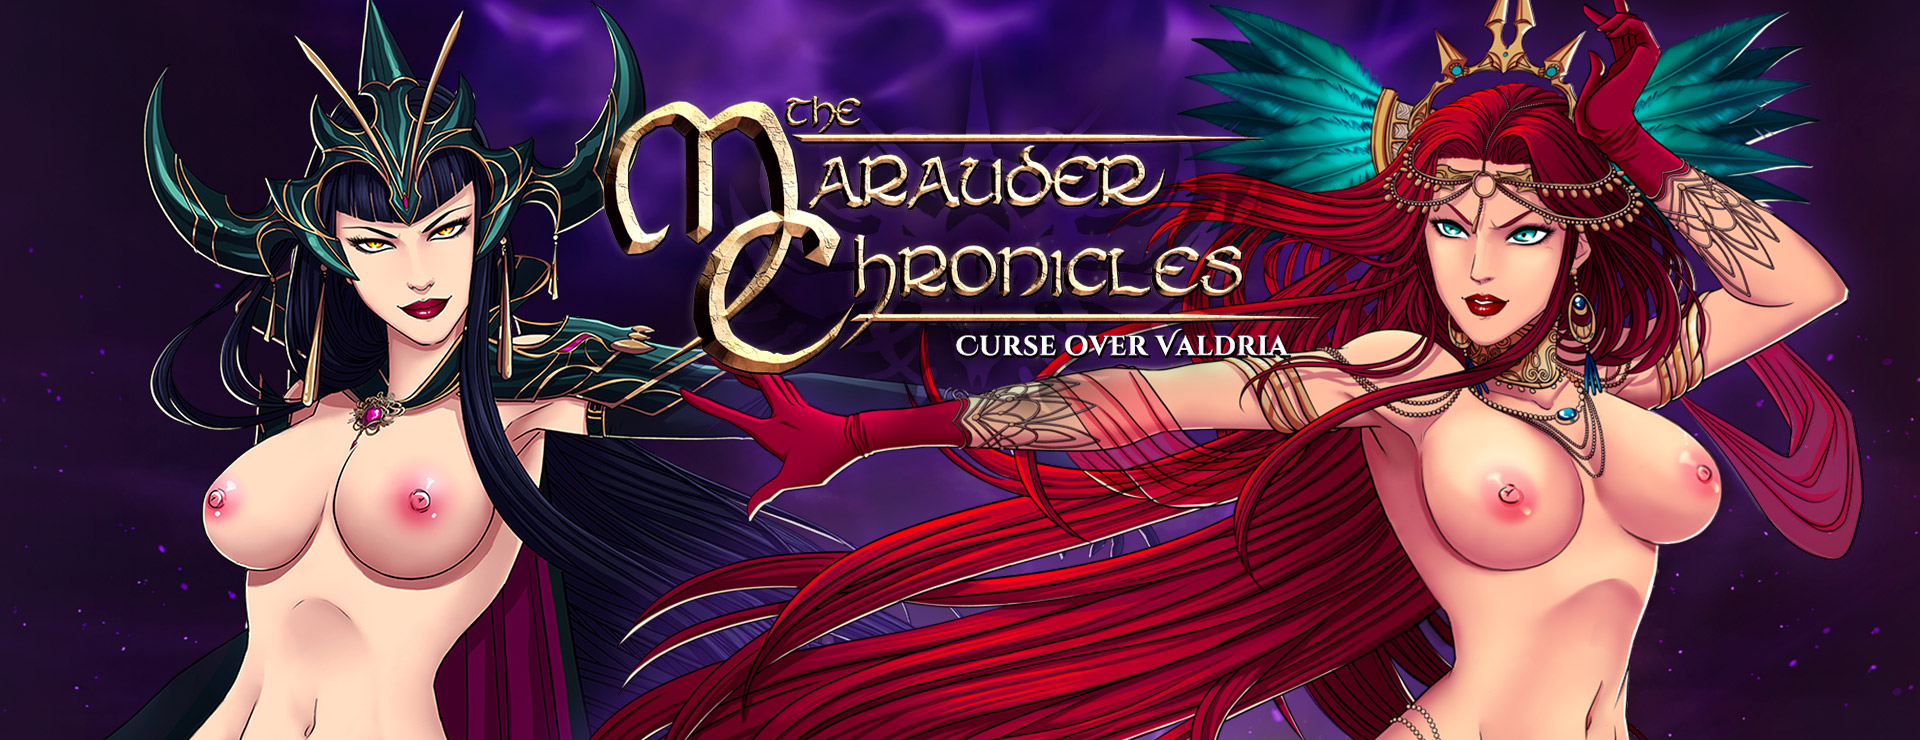 The Marauder Chronicles - Curse over Valdria - Action Adventure Game